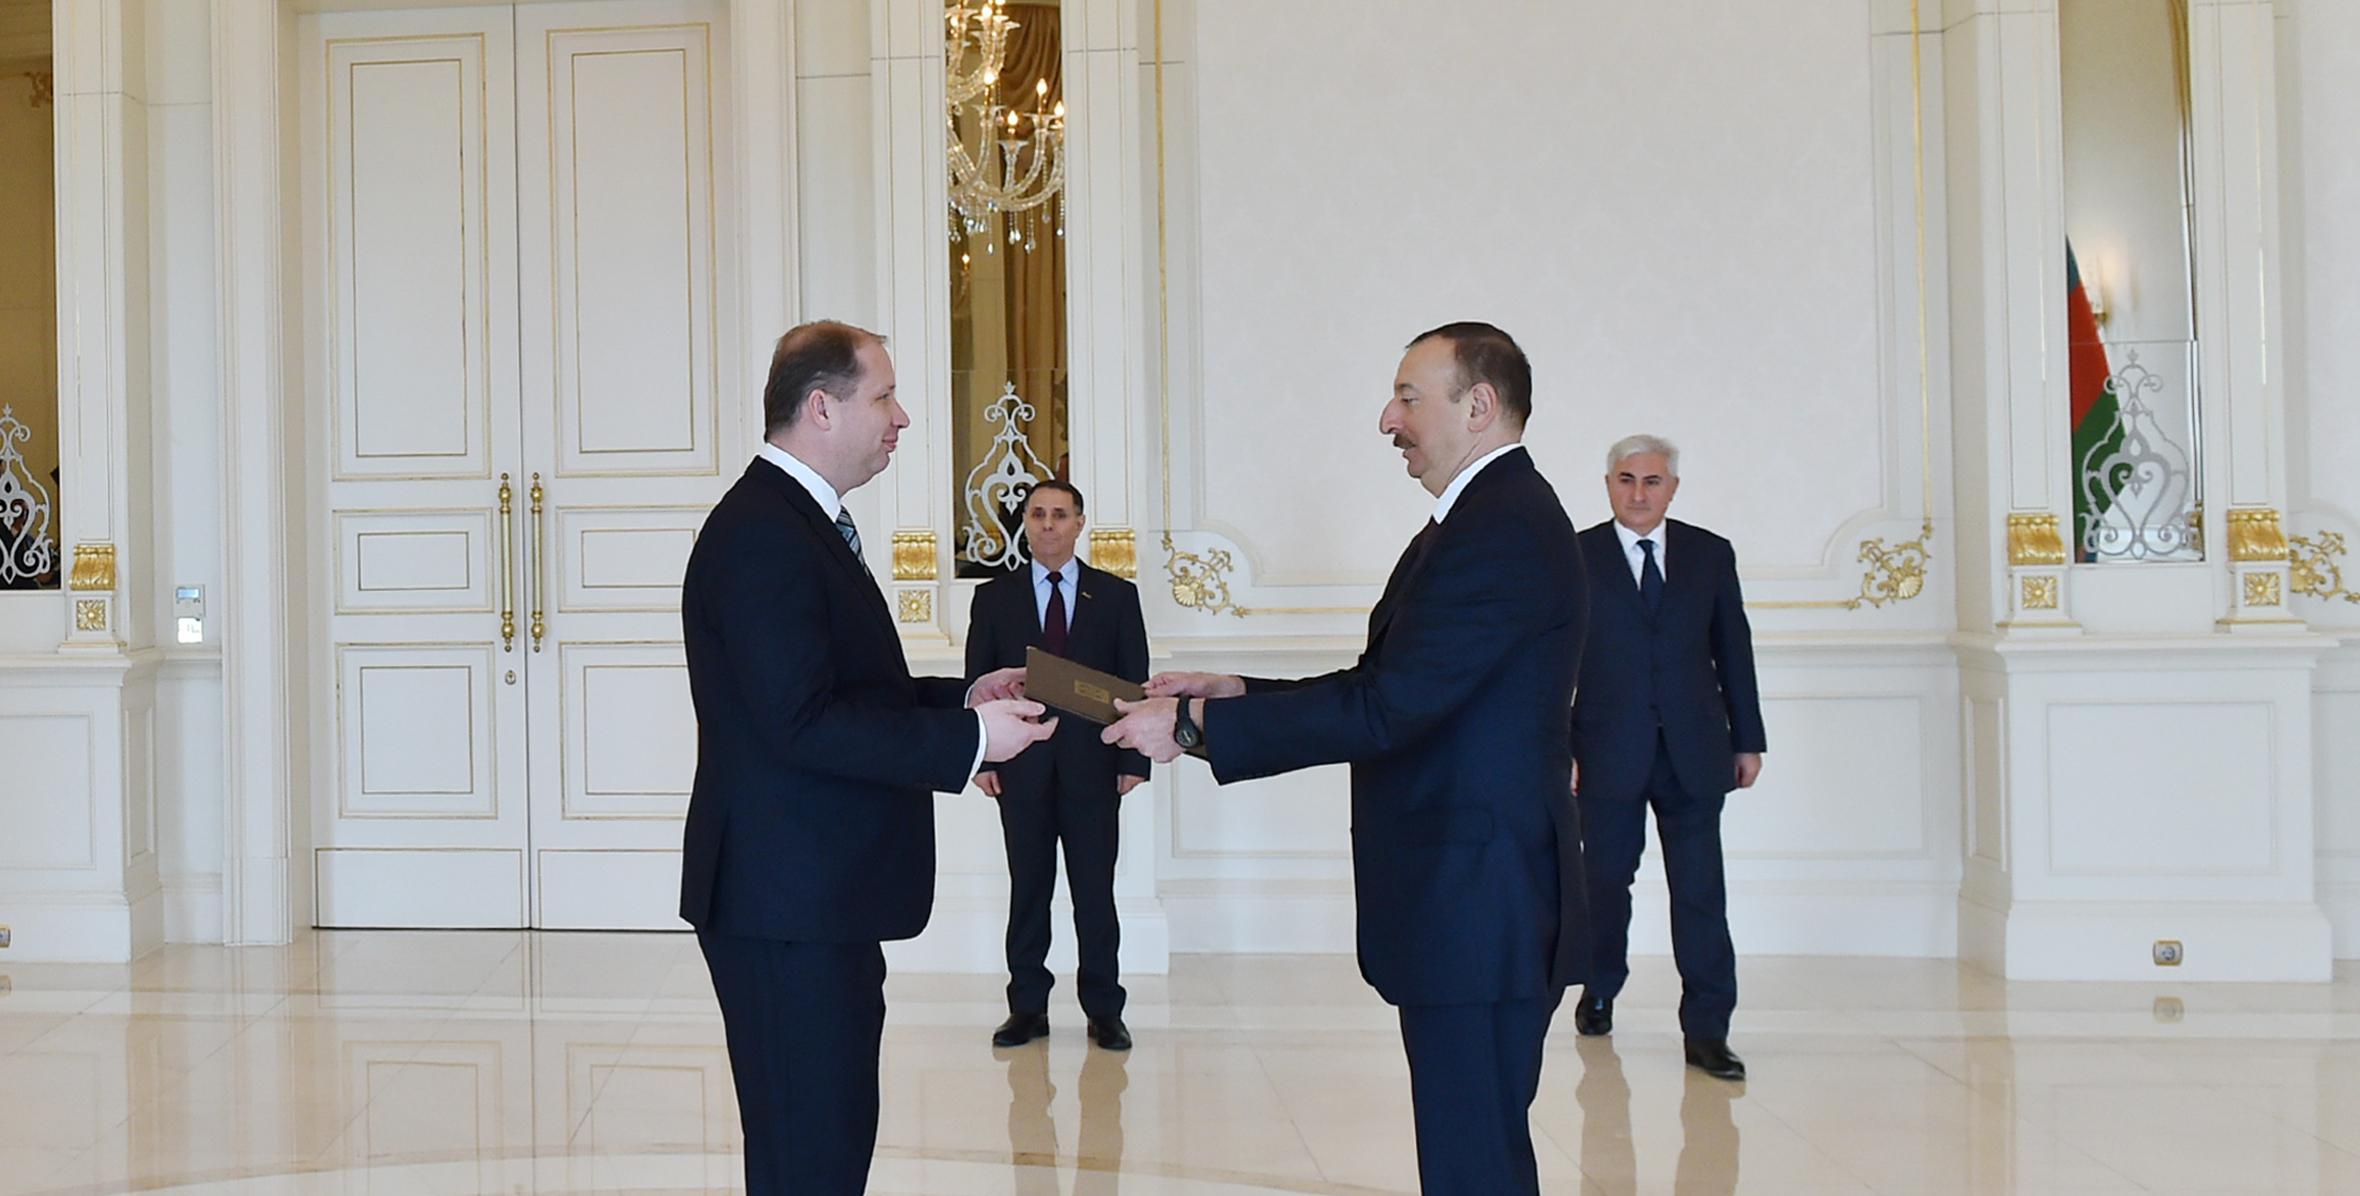 Ilham Aliyev received the credentials of the newly-appointed Ambassador of Slovakia